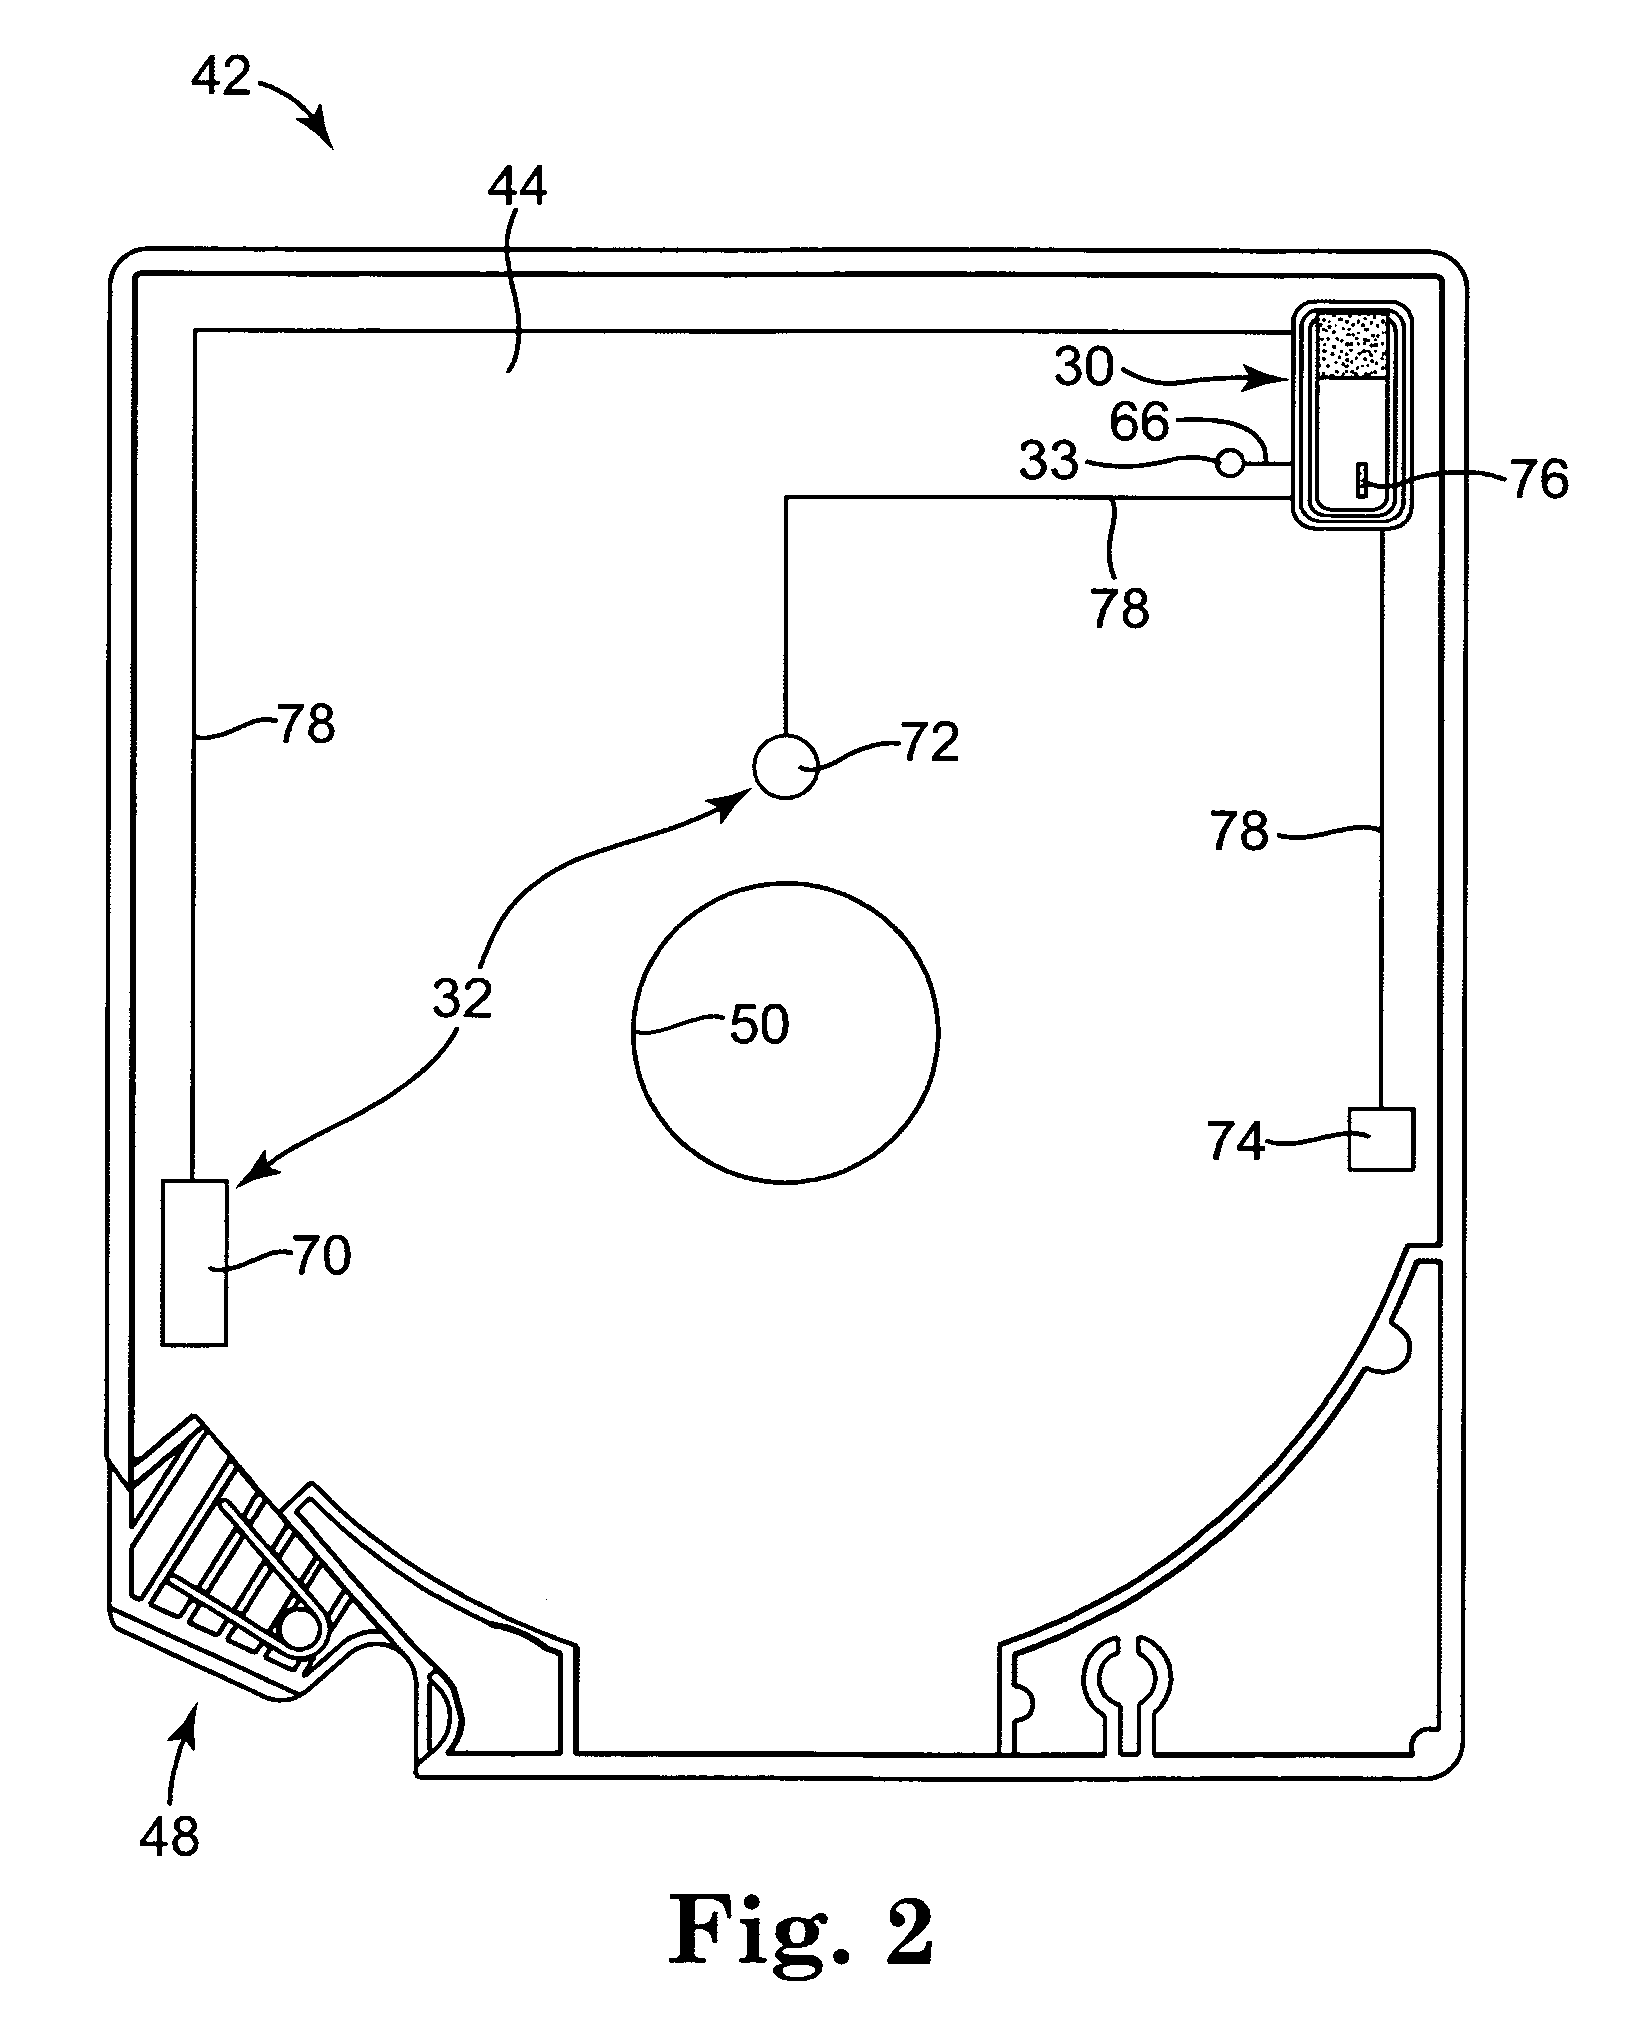 Data storage cartridge and system with tamper and damage record sensors